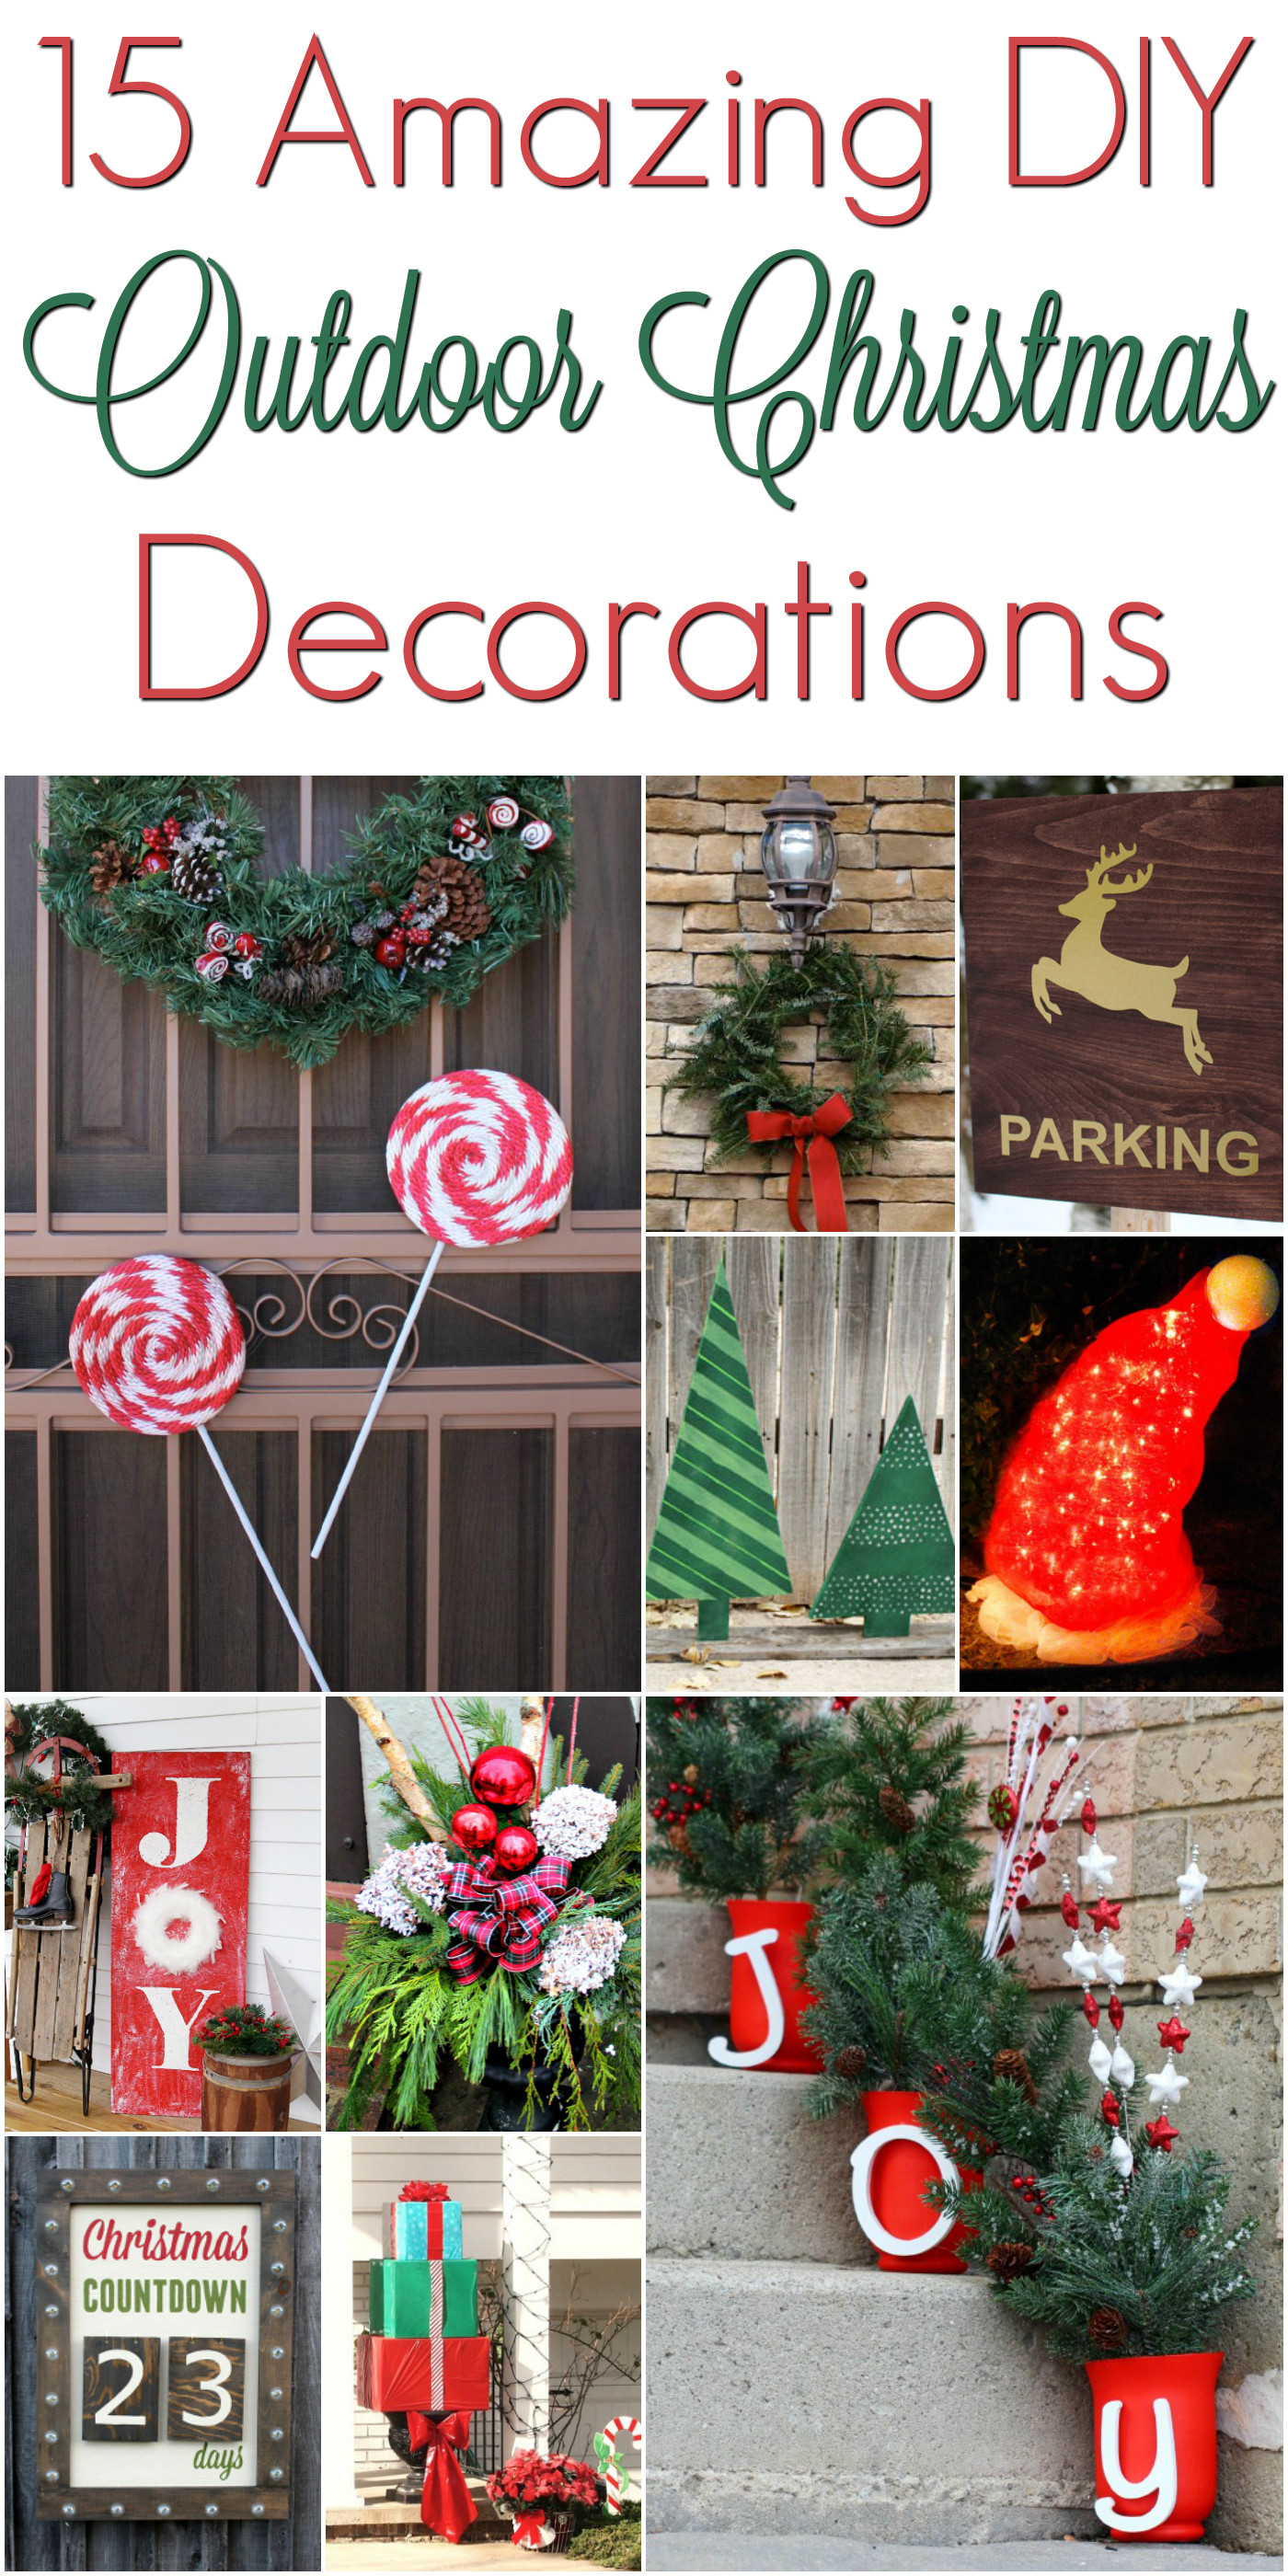 DIY Christmas Decorations For Outside
 DIY Christmas Outdoor Decorations ChristmasDecorations